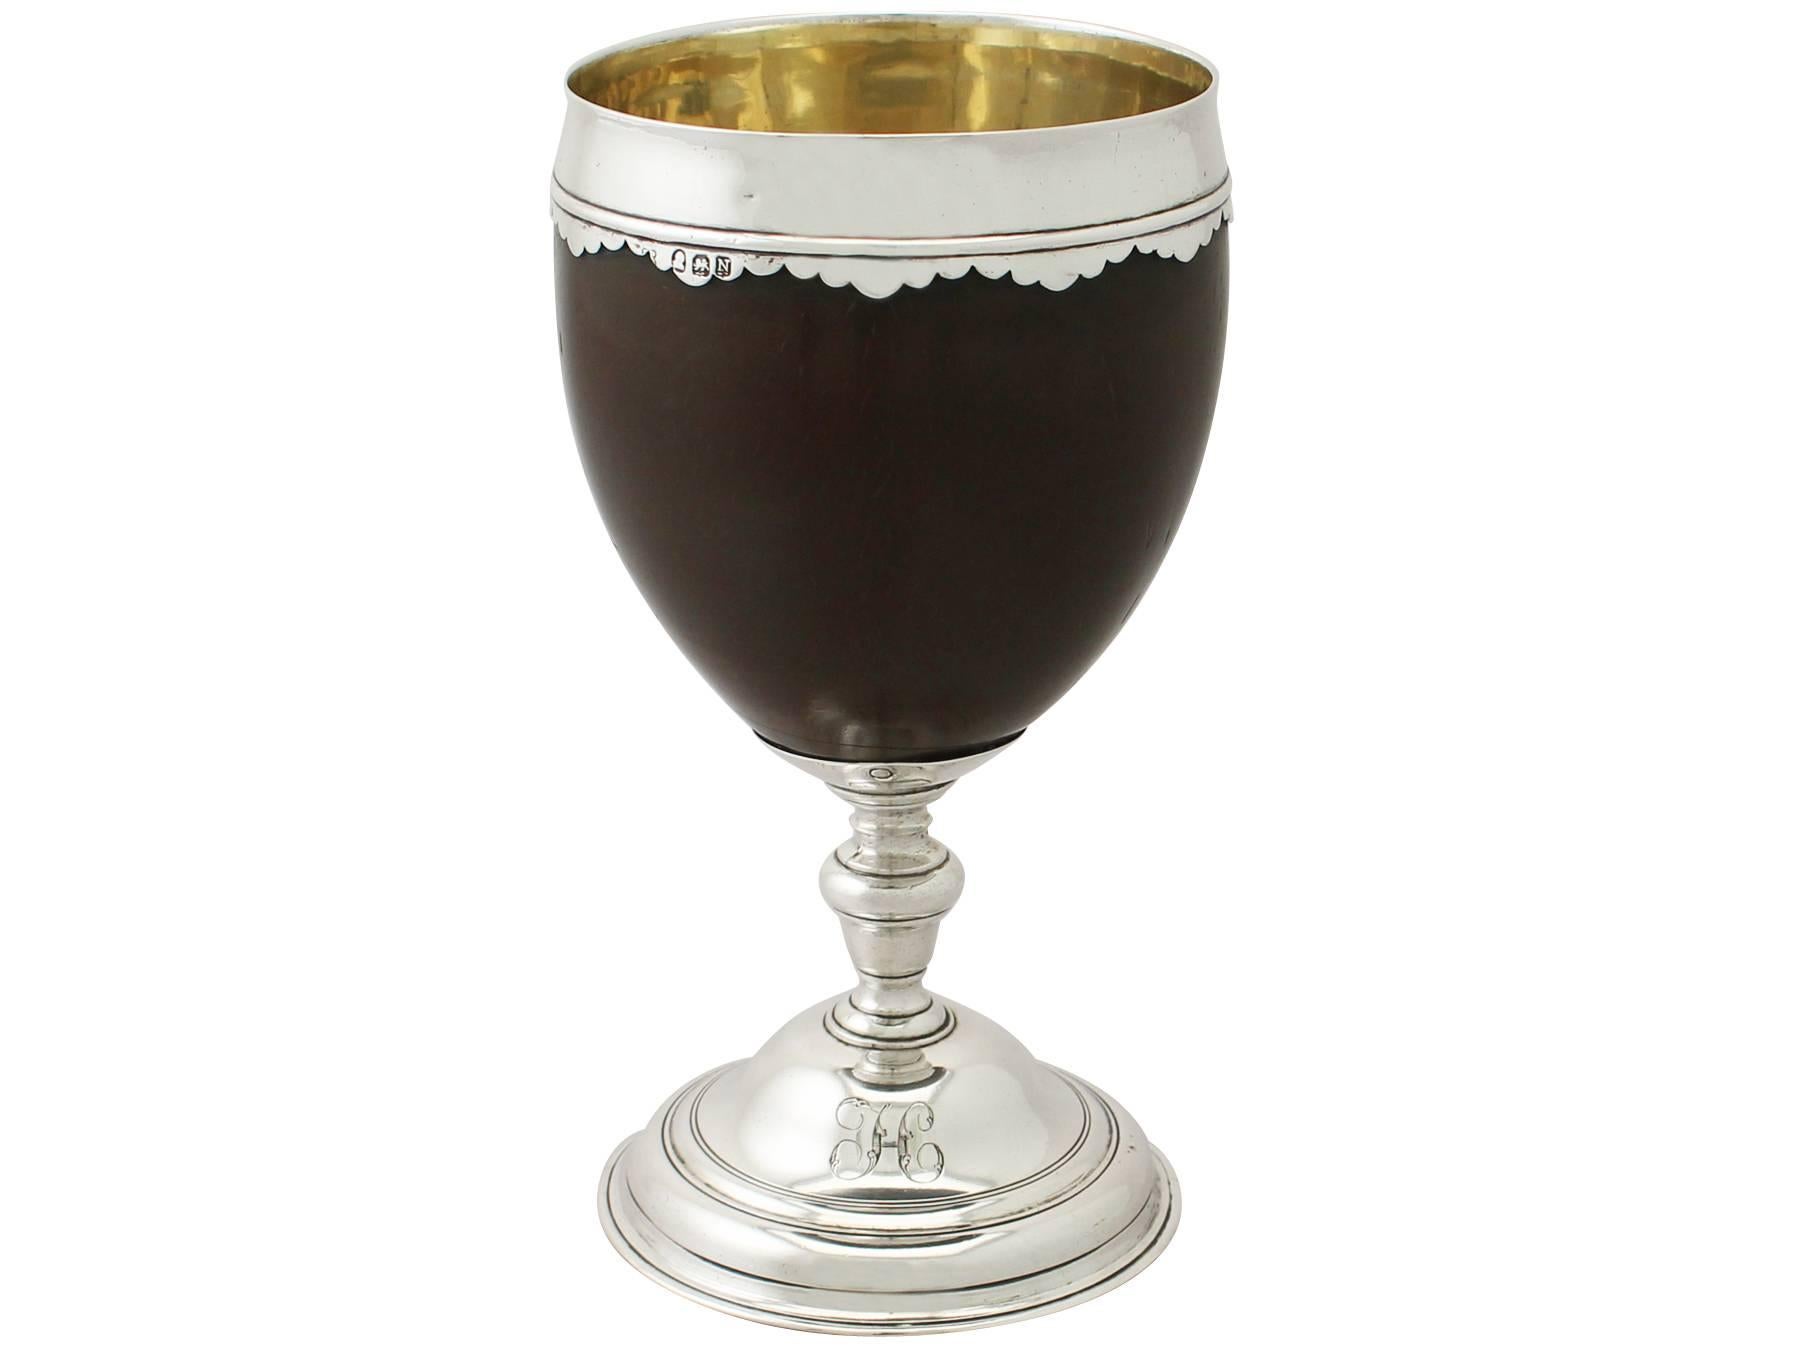 An exceptional, fine and impressive antique George III English sterling silver mounted coconut cup; an addition to our diverse Georgian silverware collection.

This exceptional antique George III sterling silver mounted coconut cup has a circular